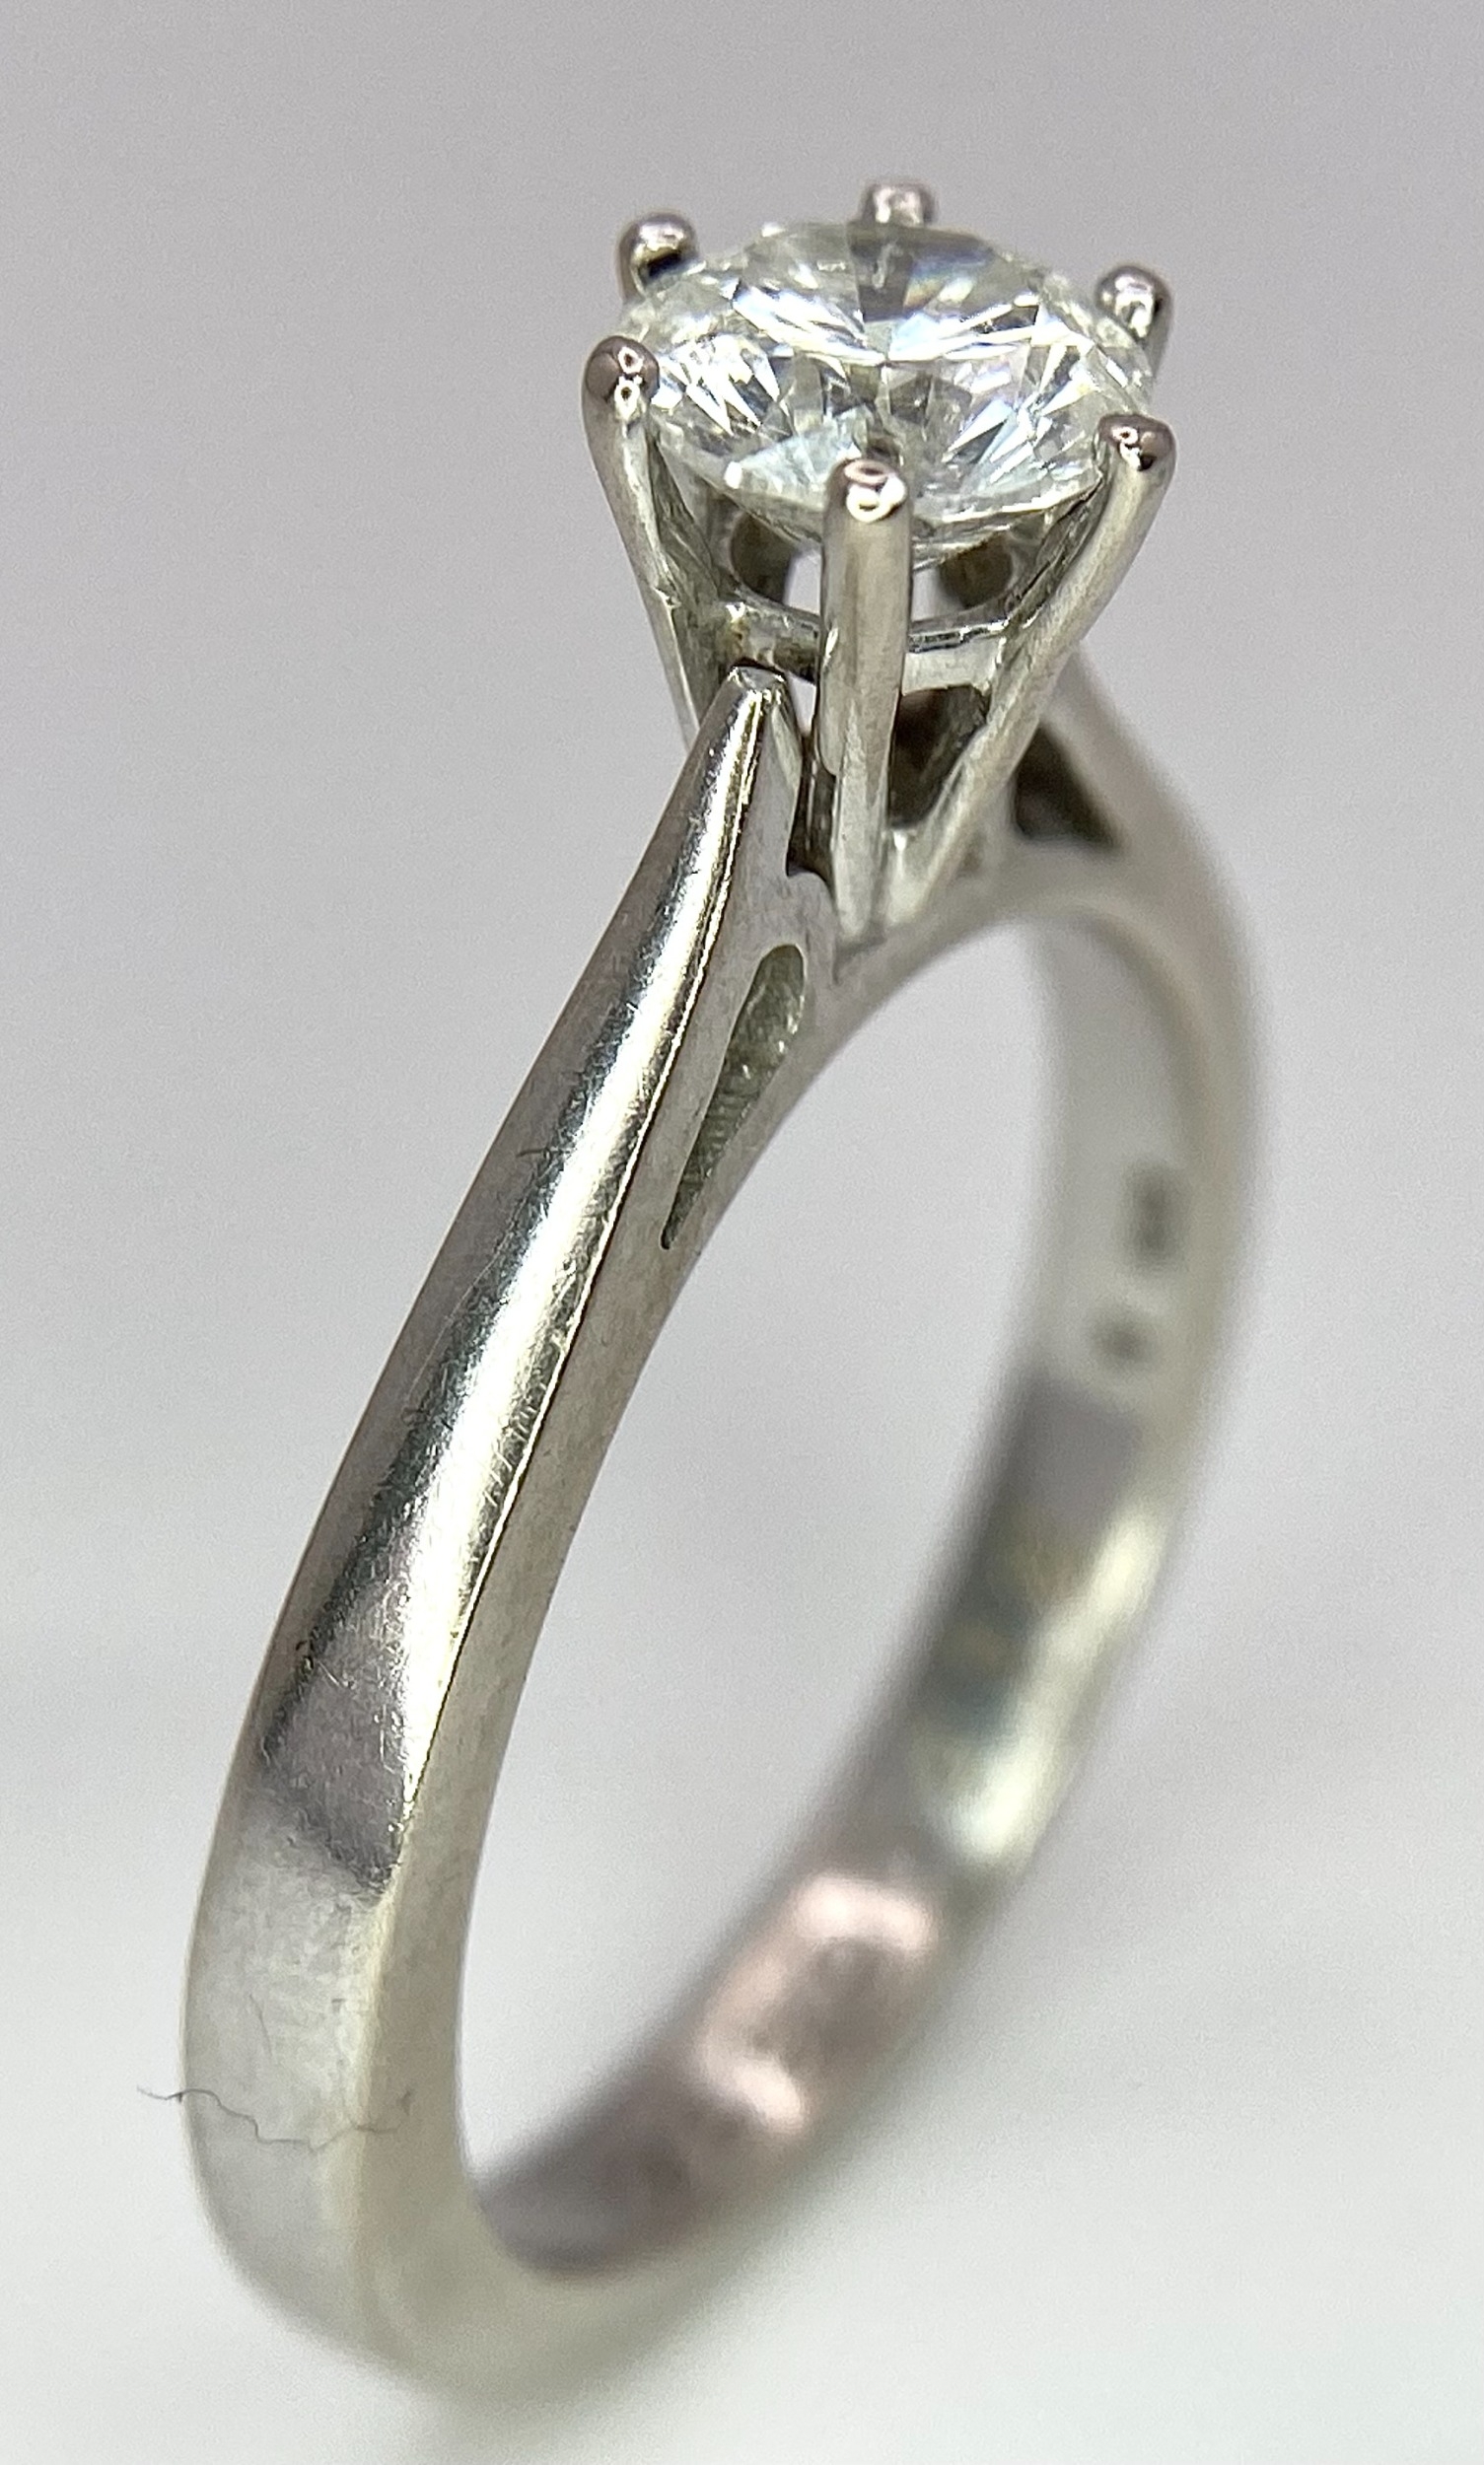 AN 18K WHITE GOLD DIAMOND SOLITAIRE RING - BRILLIANT ROUND CUT 0.70CT. 4.2G. SIZE M - Image 4 of 9